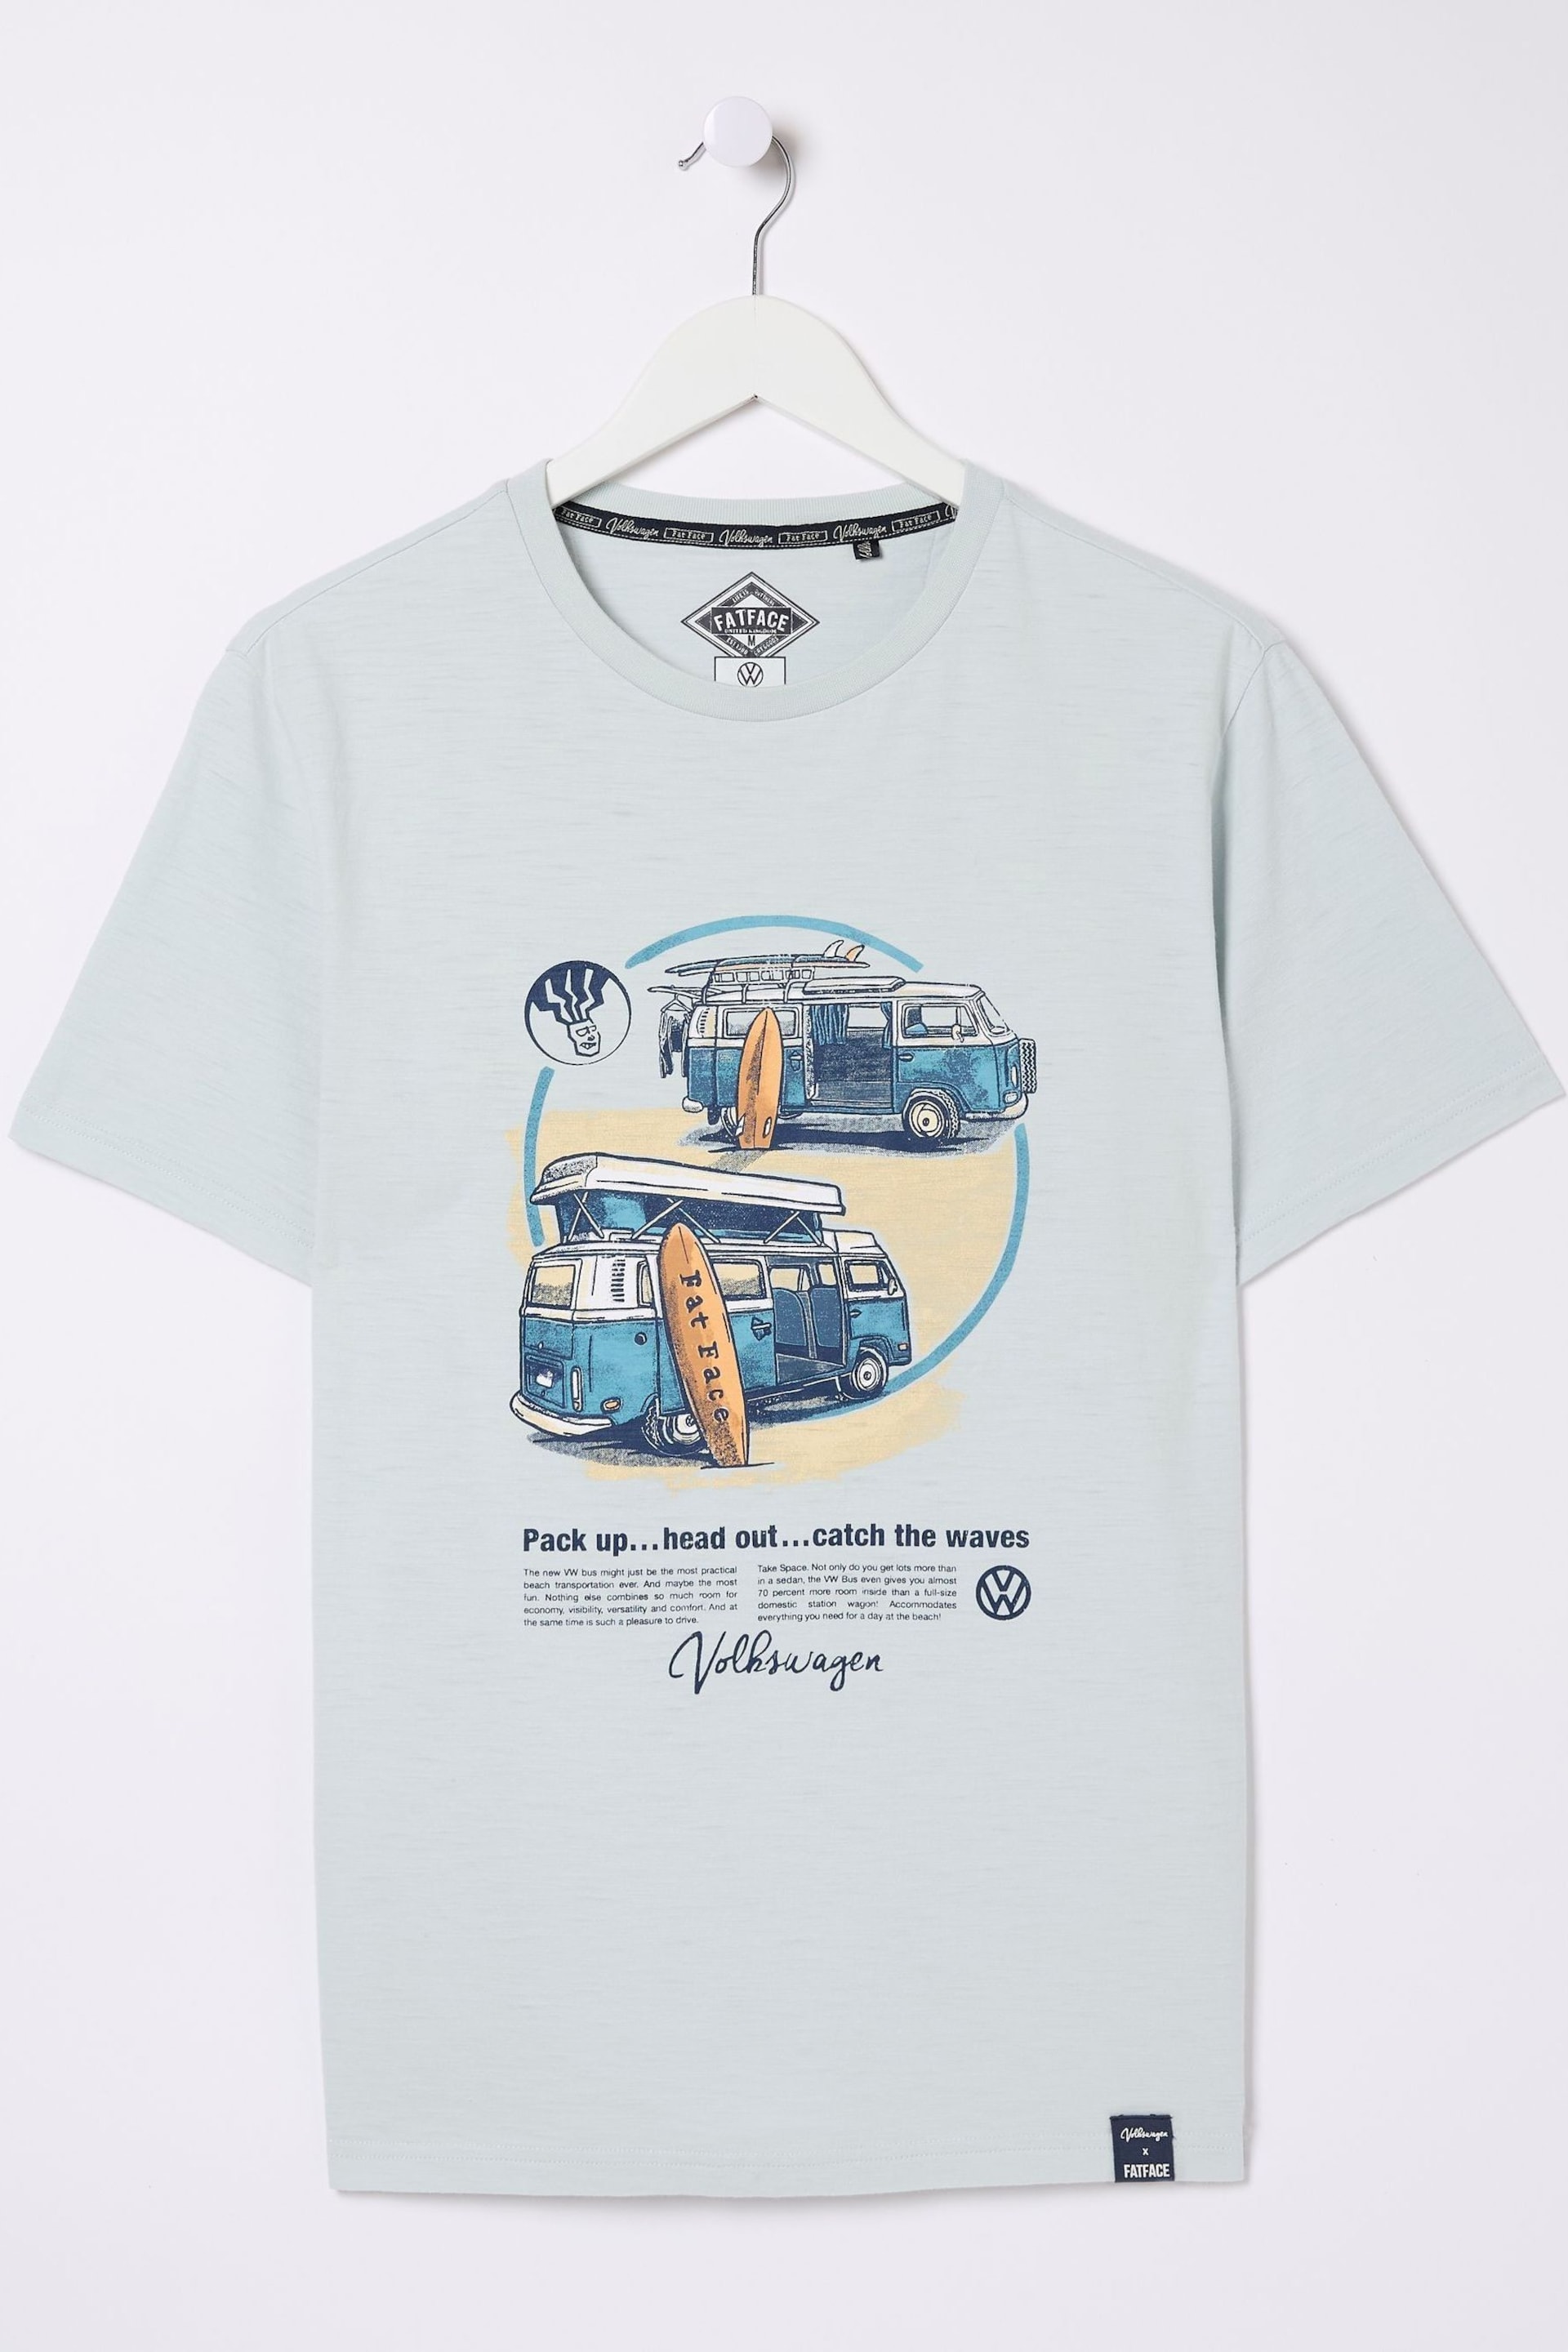 FatFace Blue VW Catch The Waves T-Shirt - Image 5 of 5